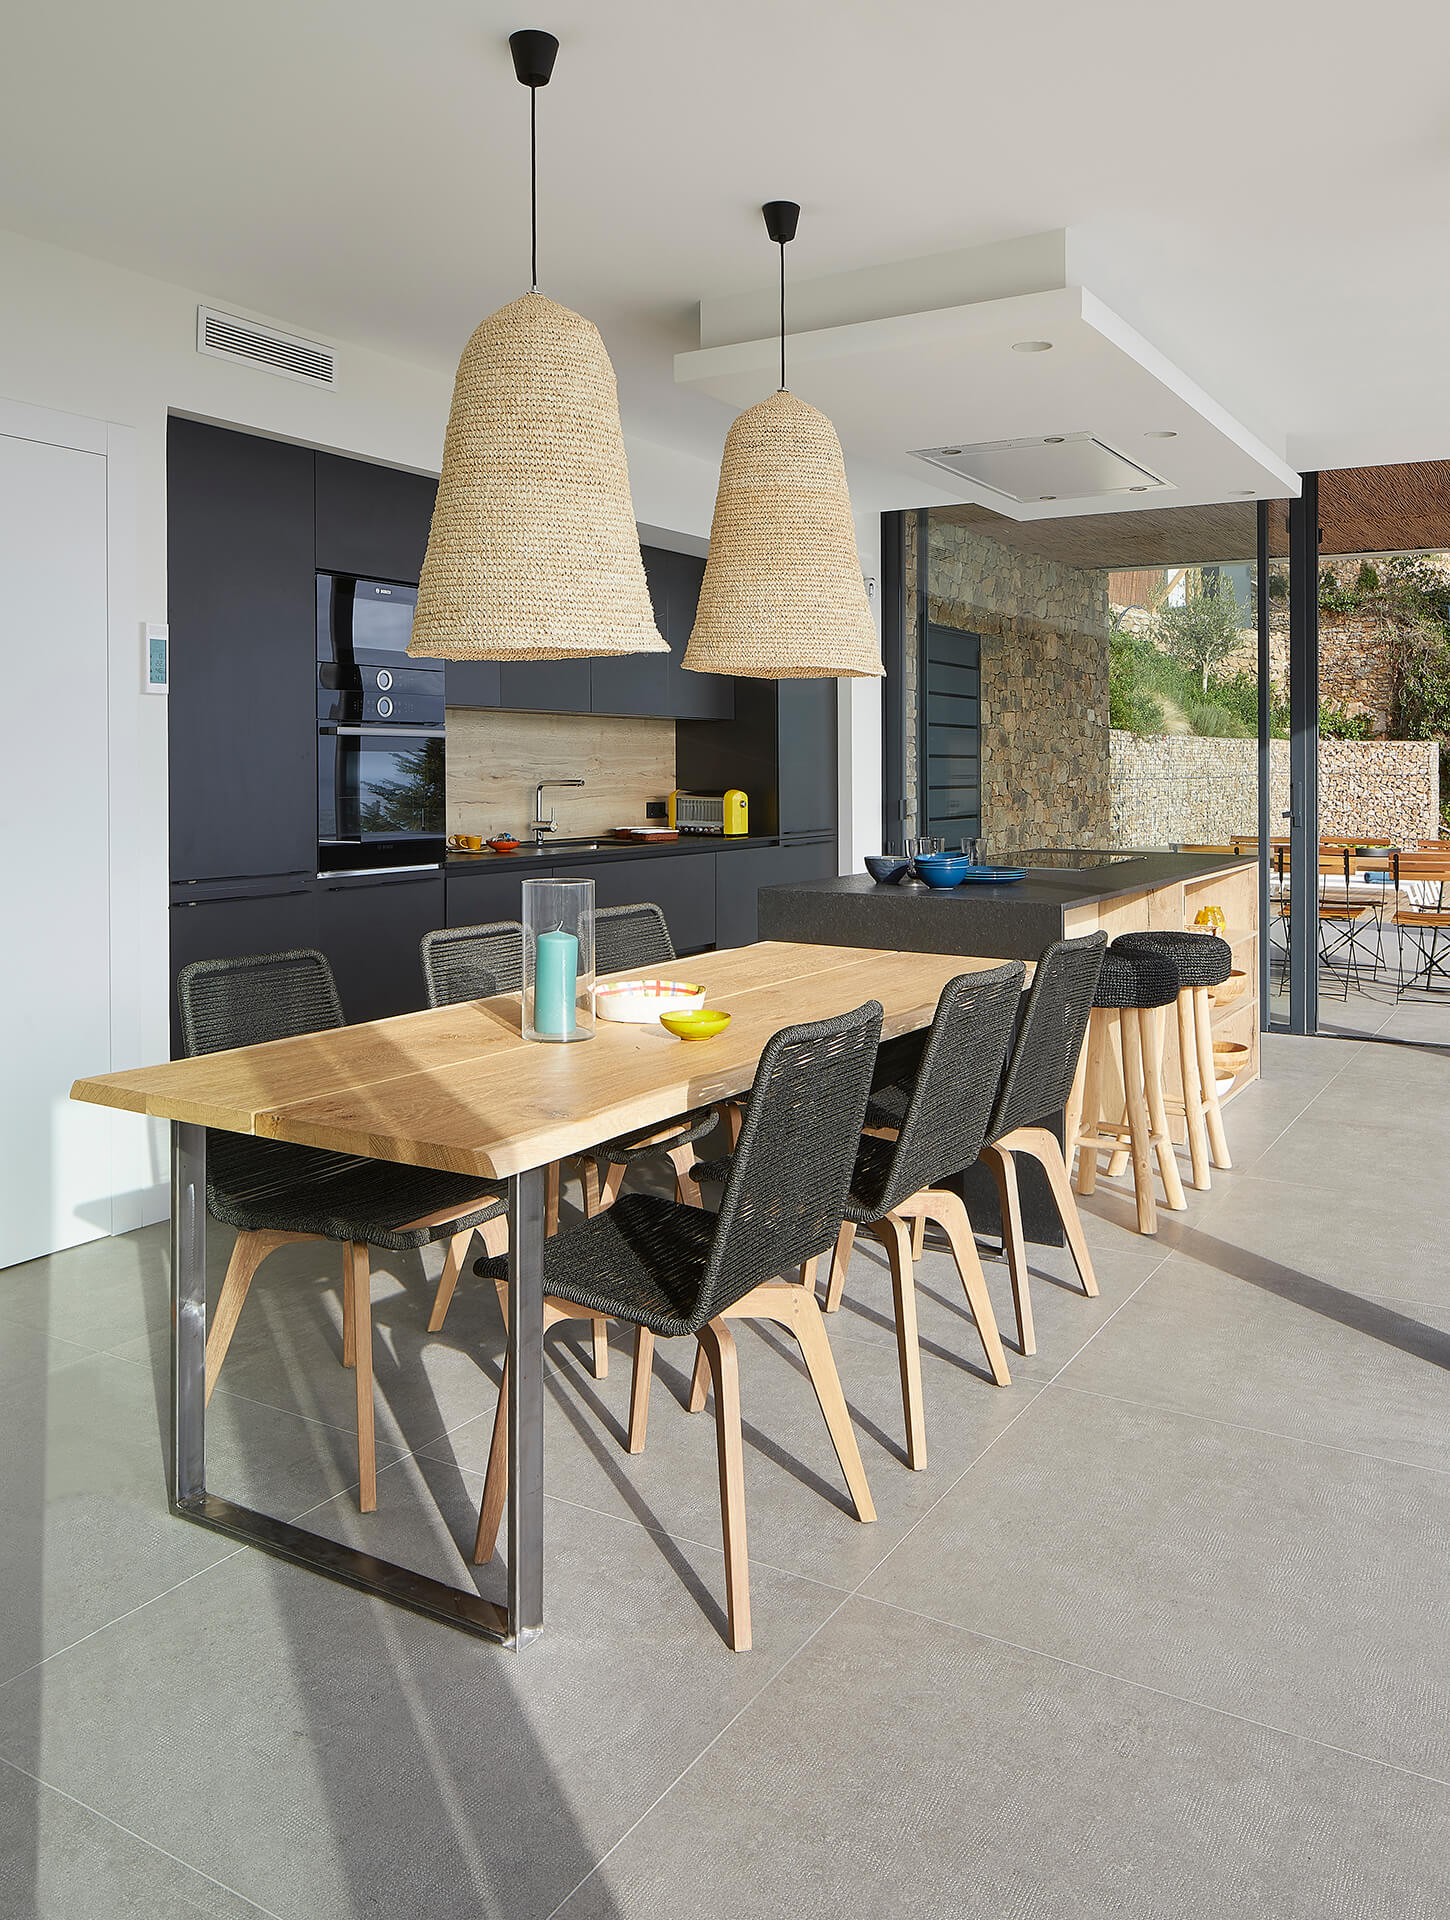 Santos kitchen finished in graphene and wooden table